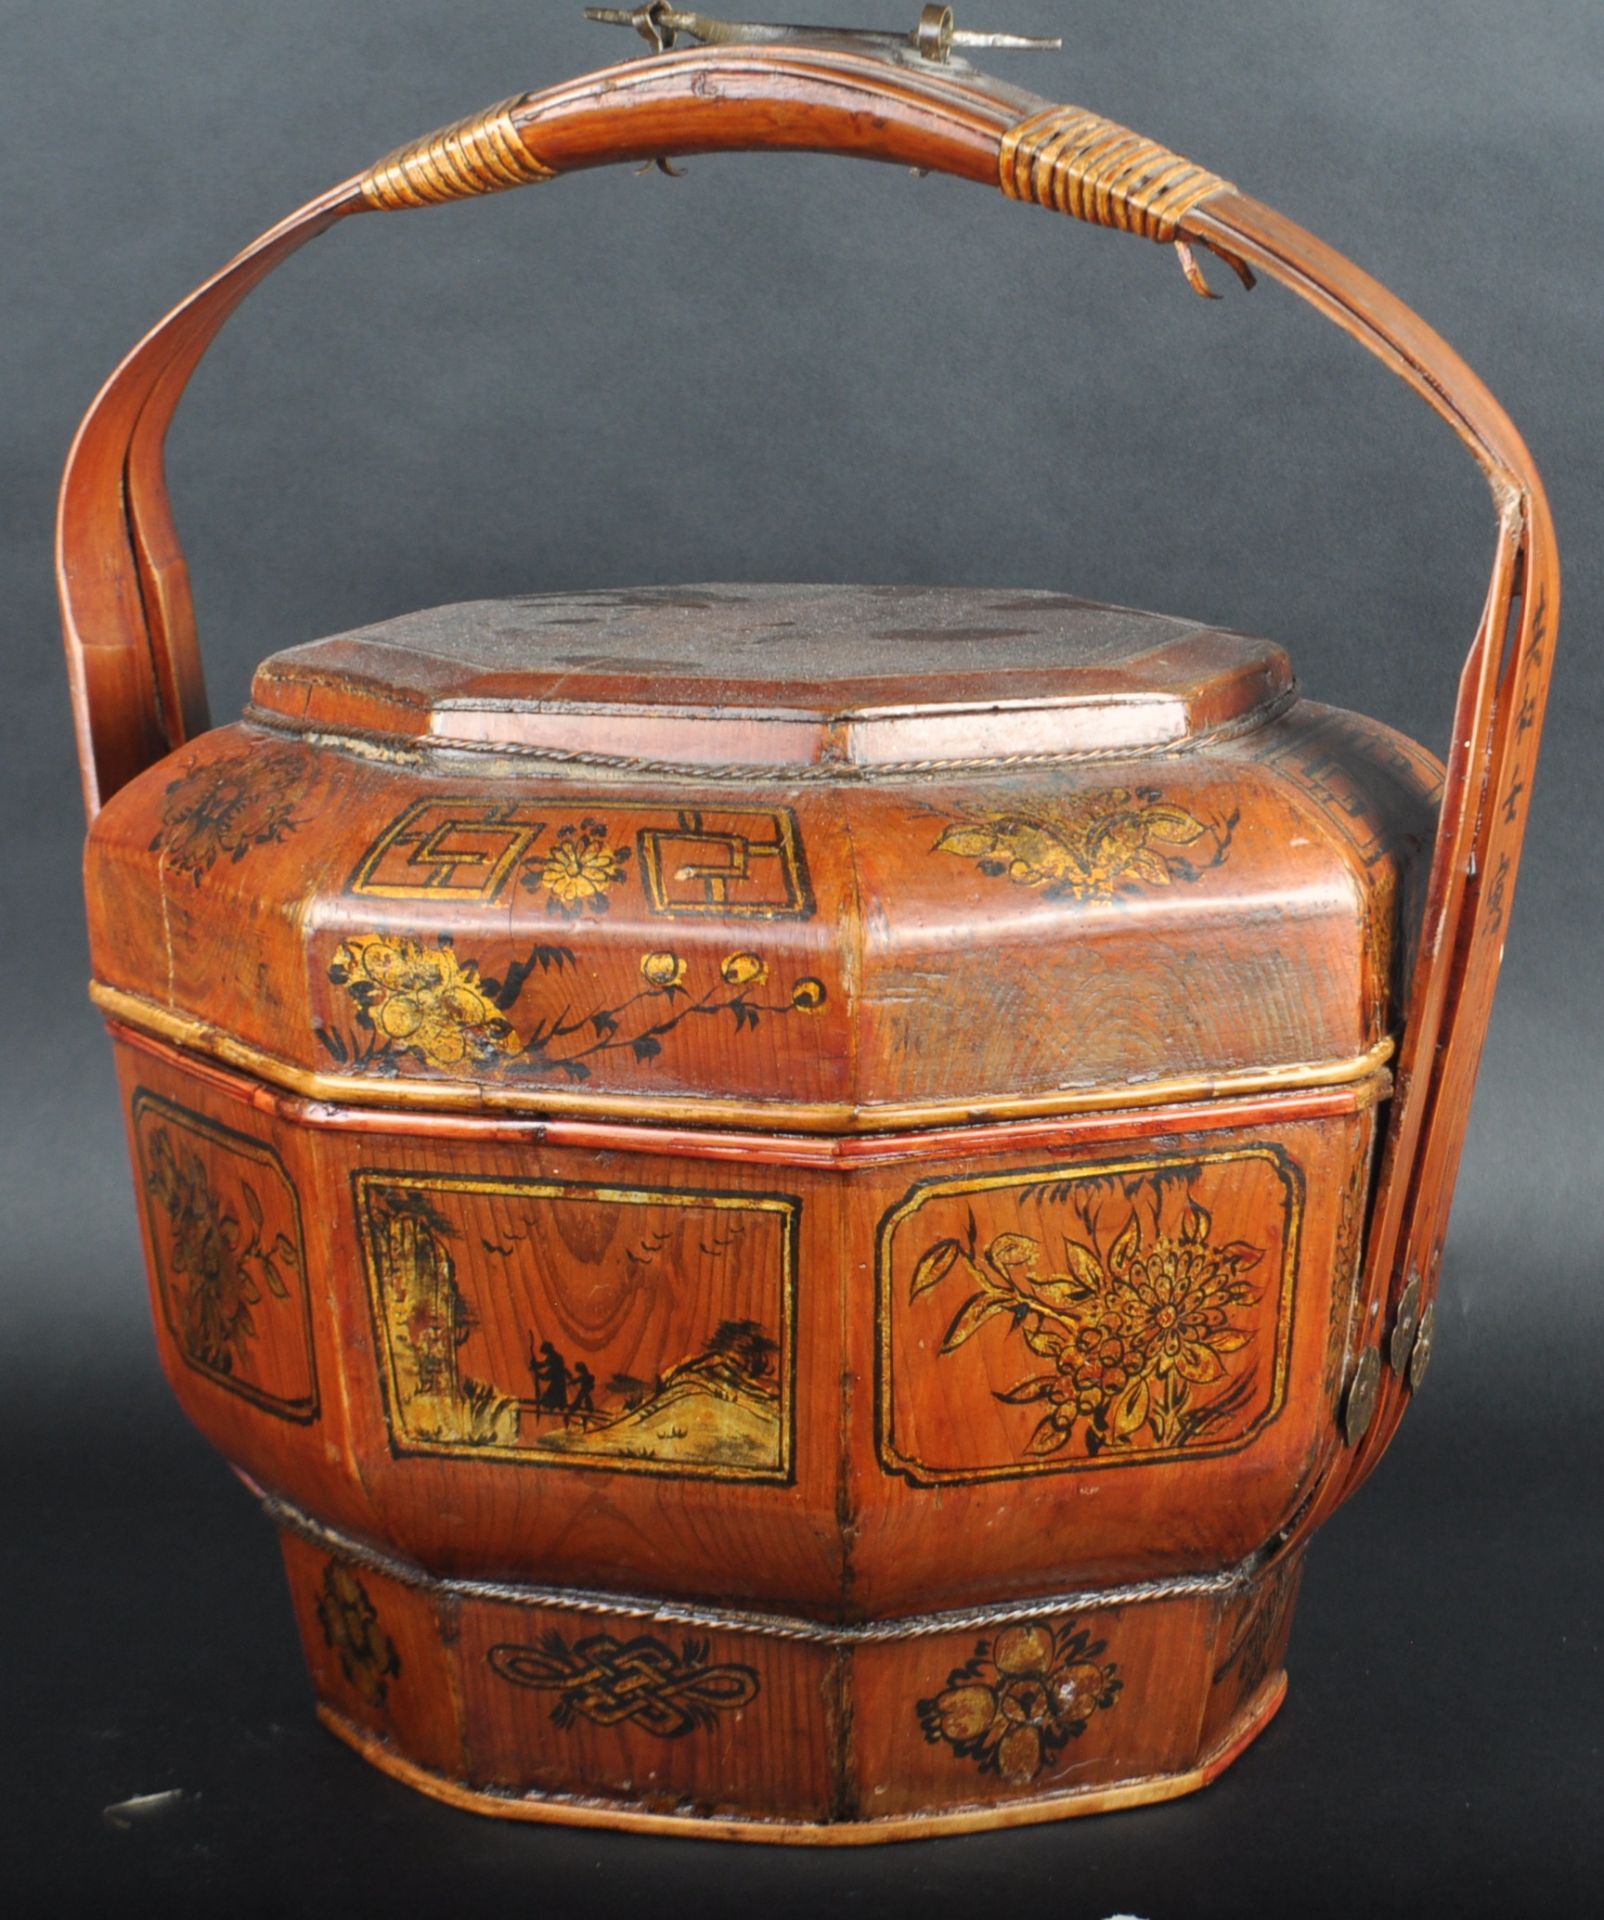 EARLY 20TH CENTURY CHINESE RICE BOX - Image 7 of 13